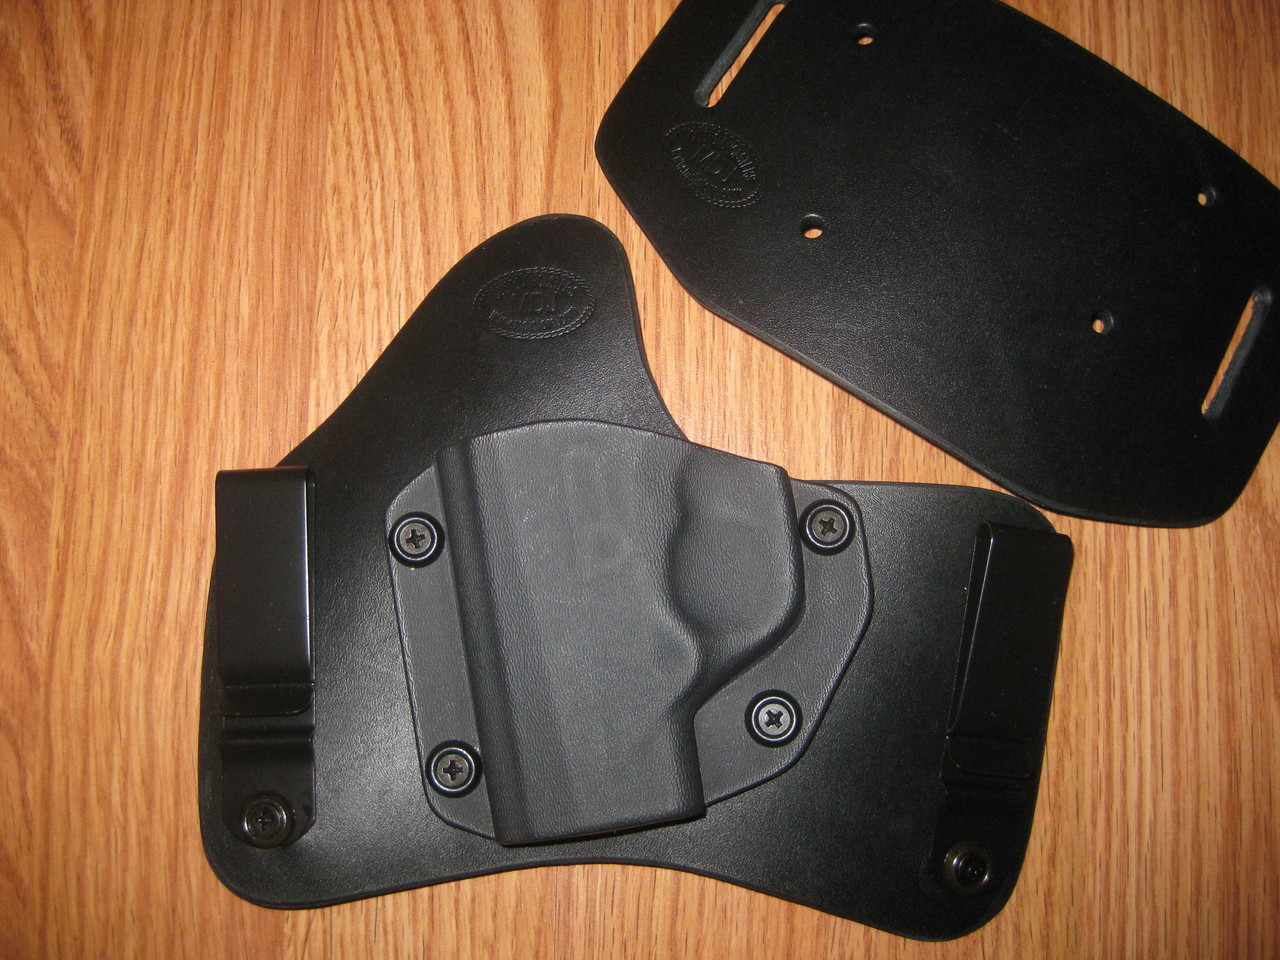 IWB/OWB combo Kydex/Leather Hybrid Holster with adjustable retention for Glock 